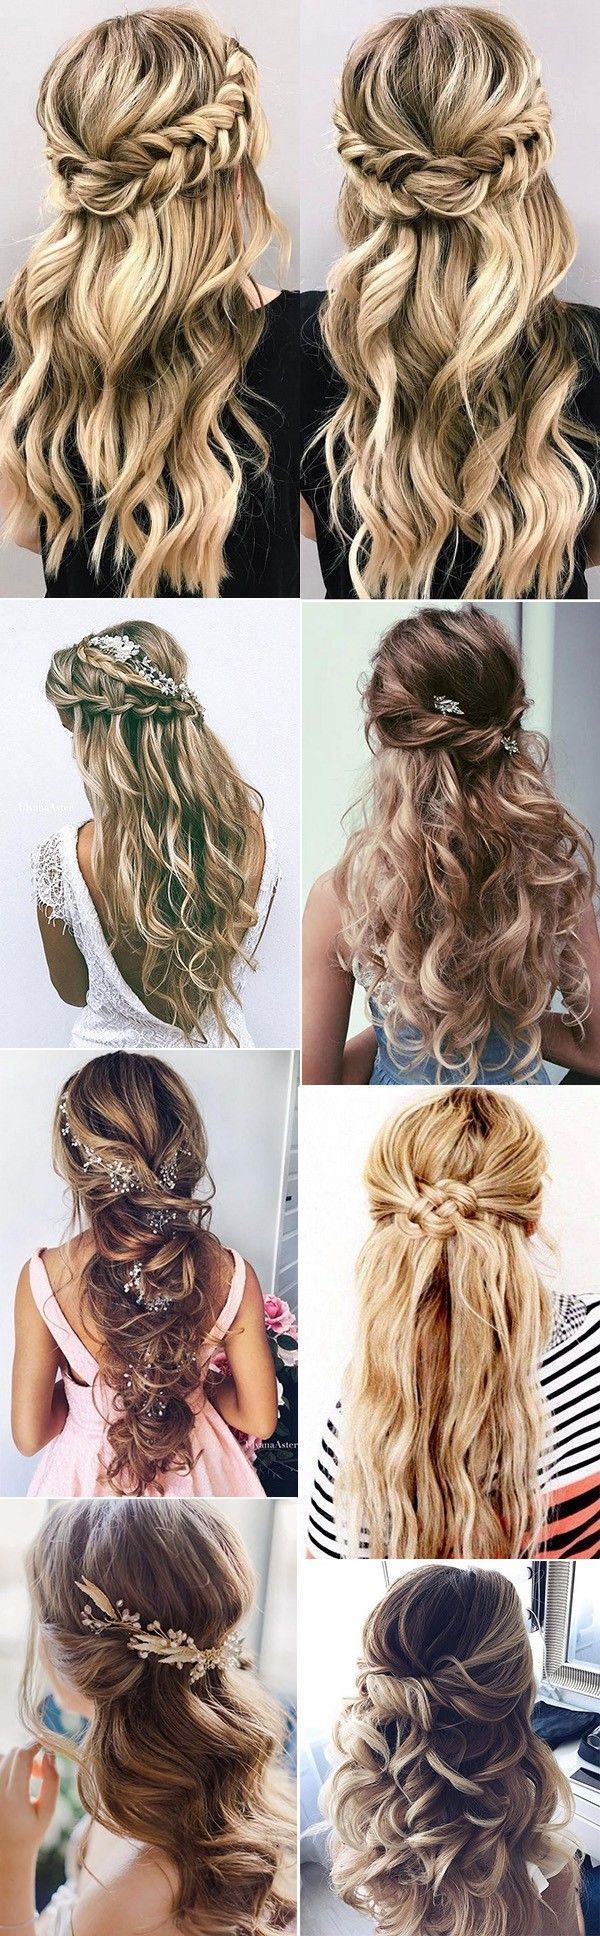 15 Chic Half Up Half Down Wedding Hairstyles for Long Hair